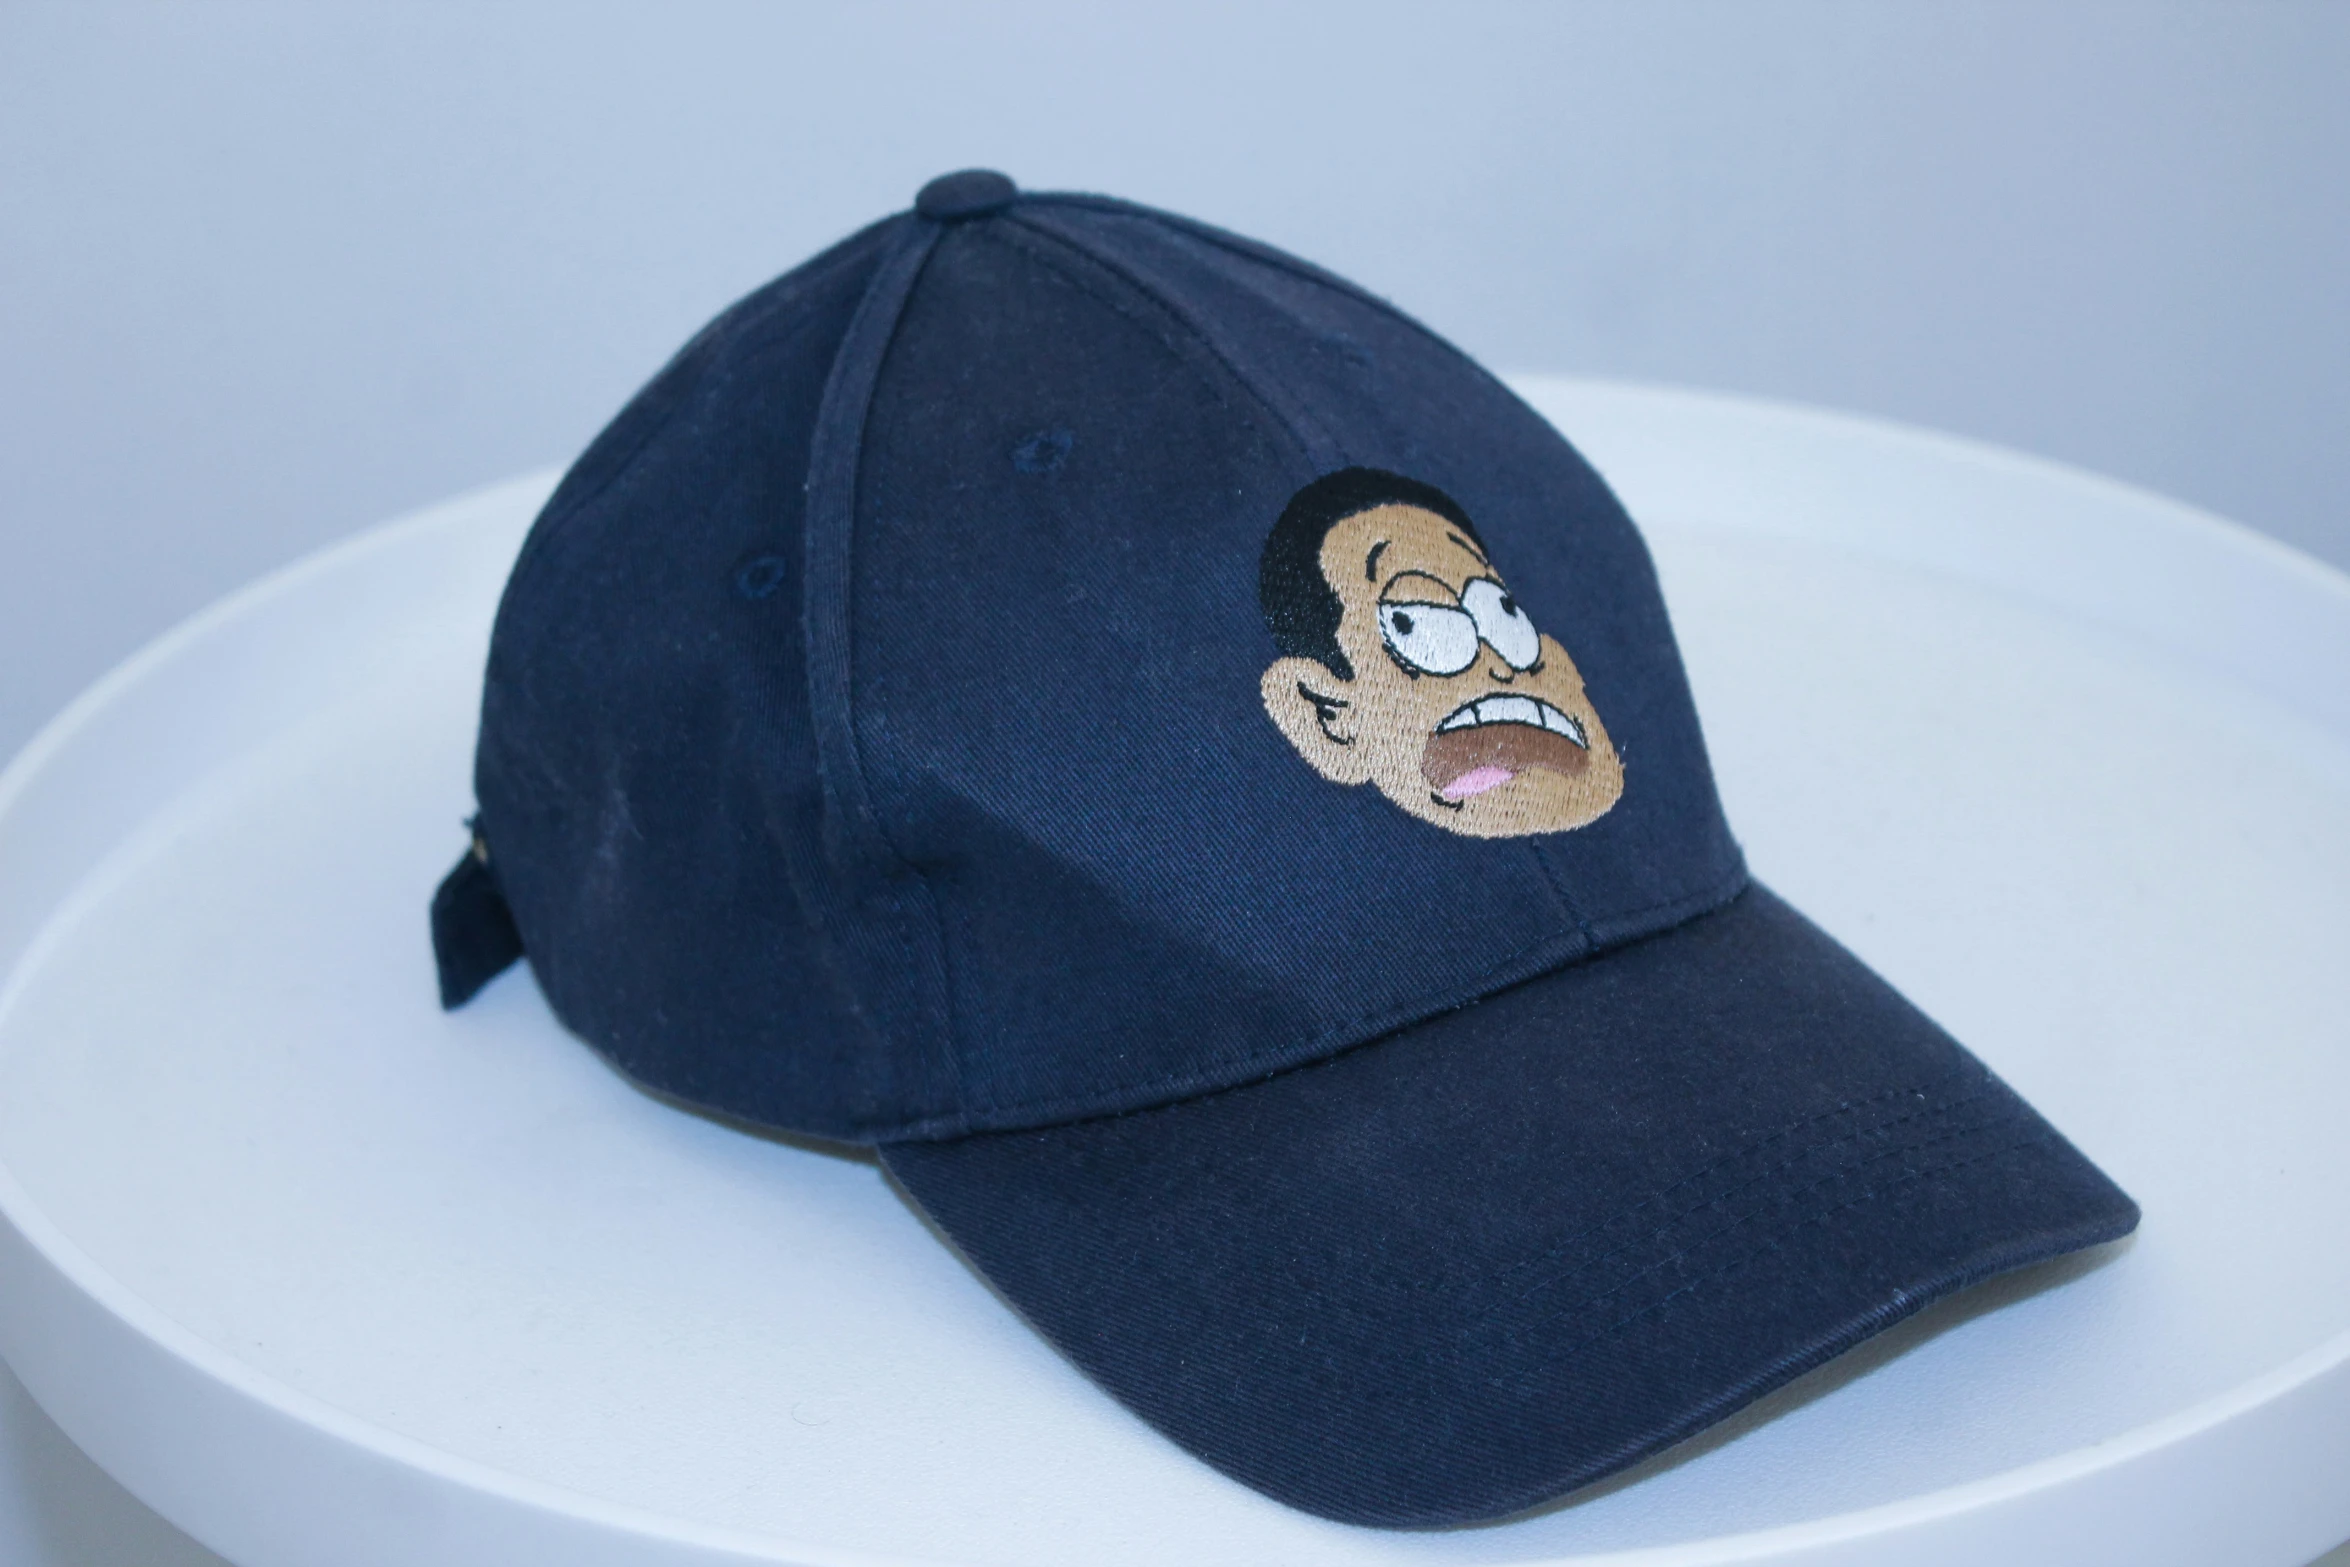 a hat with the face of homer simpson emblazoned on it